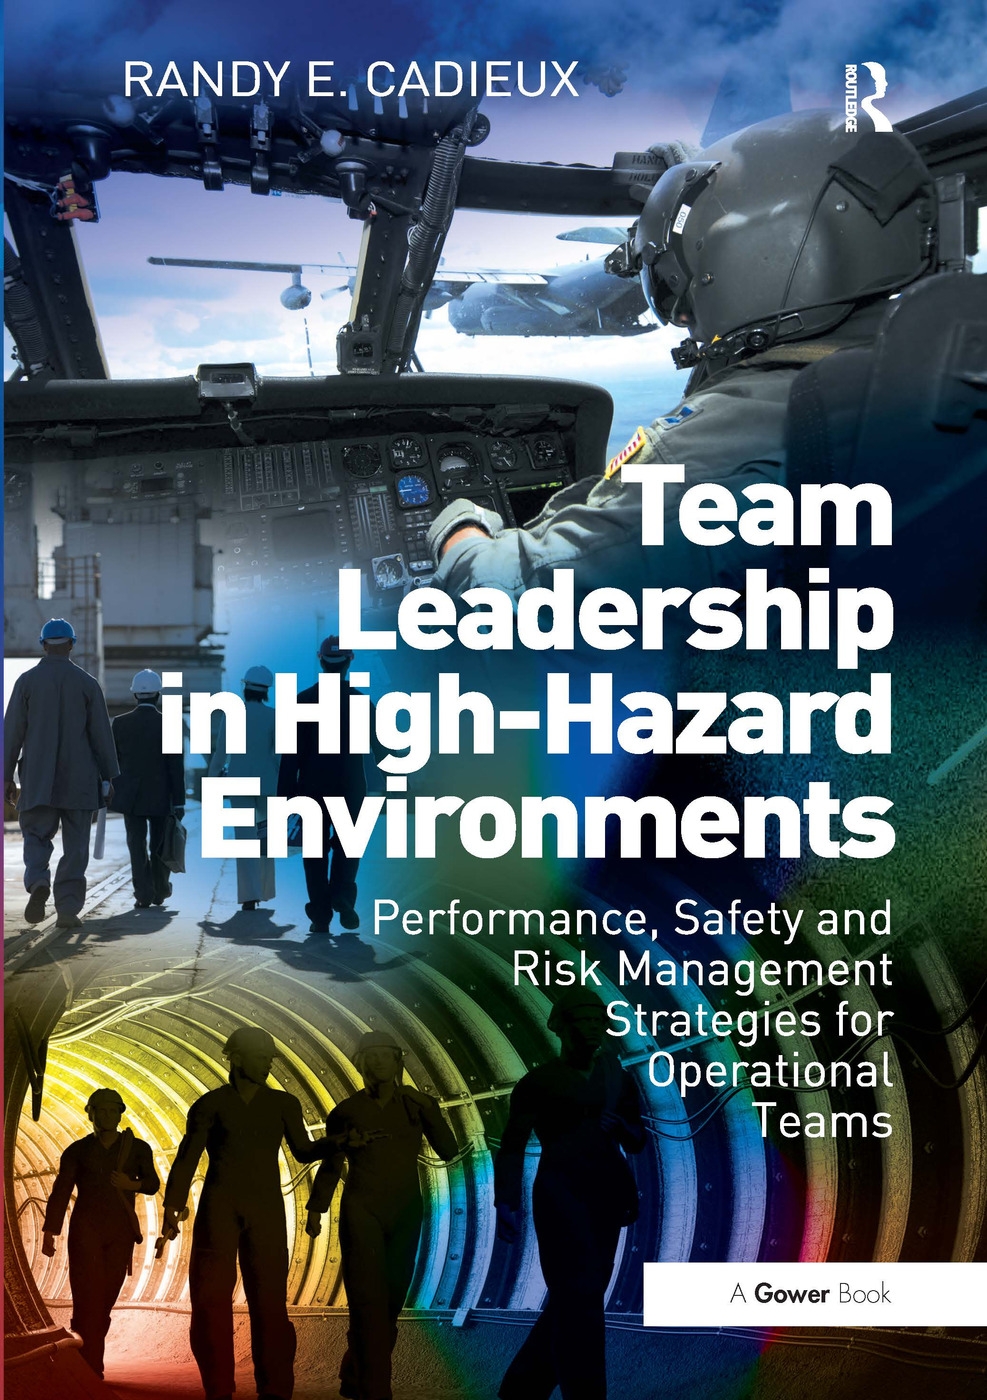 Team Leadership in High-Hazard Environments: Performance, Safety and Risk Management Strategies for Operational Teams